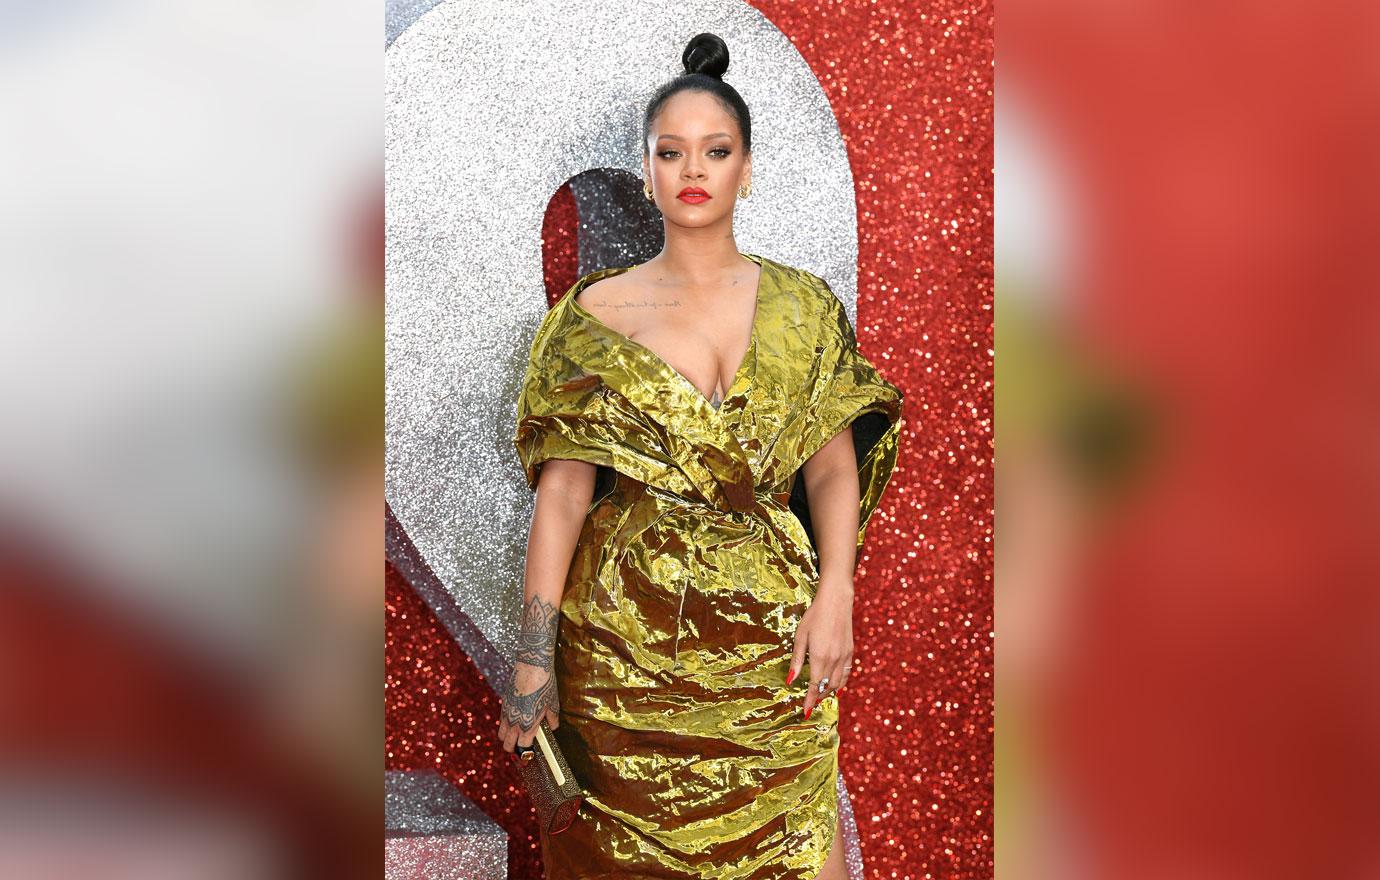 Rihanna Speaks Out About Her Weight Gain I'm 'Thicc' Now